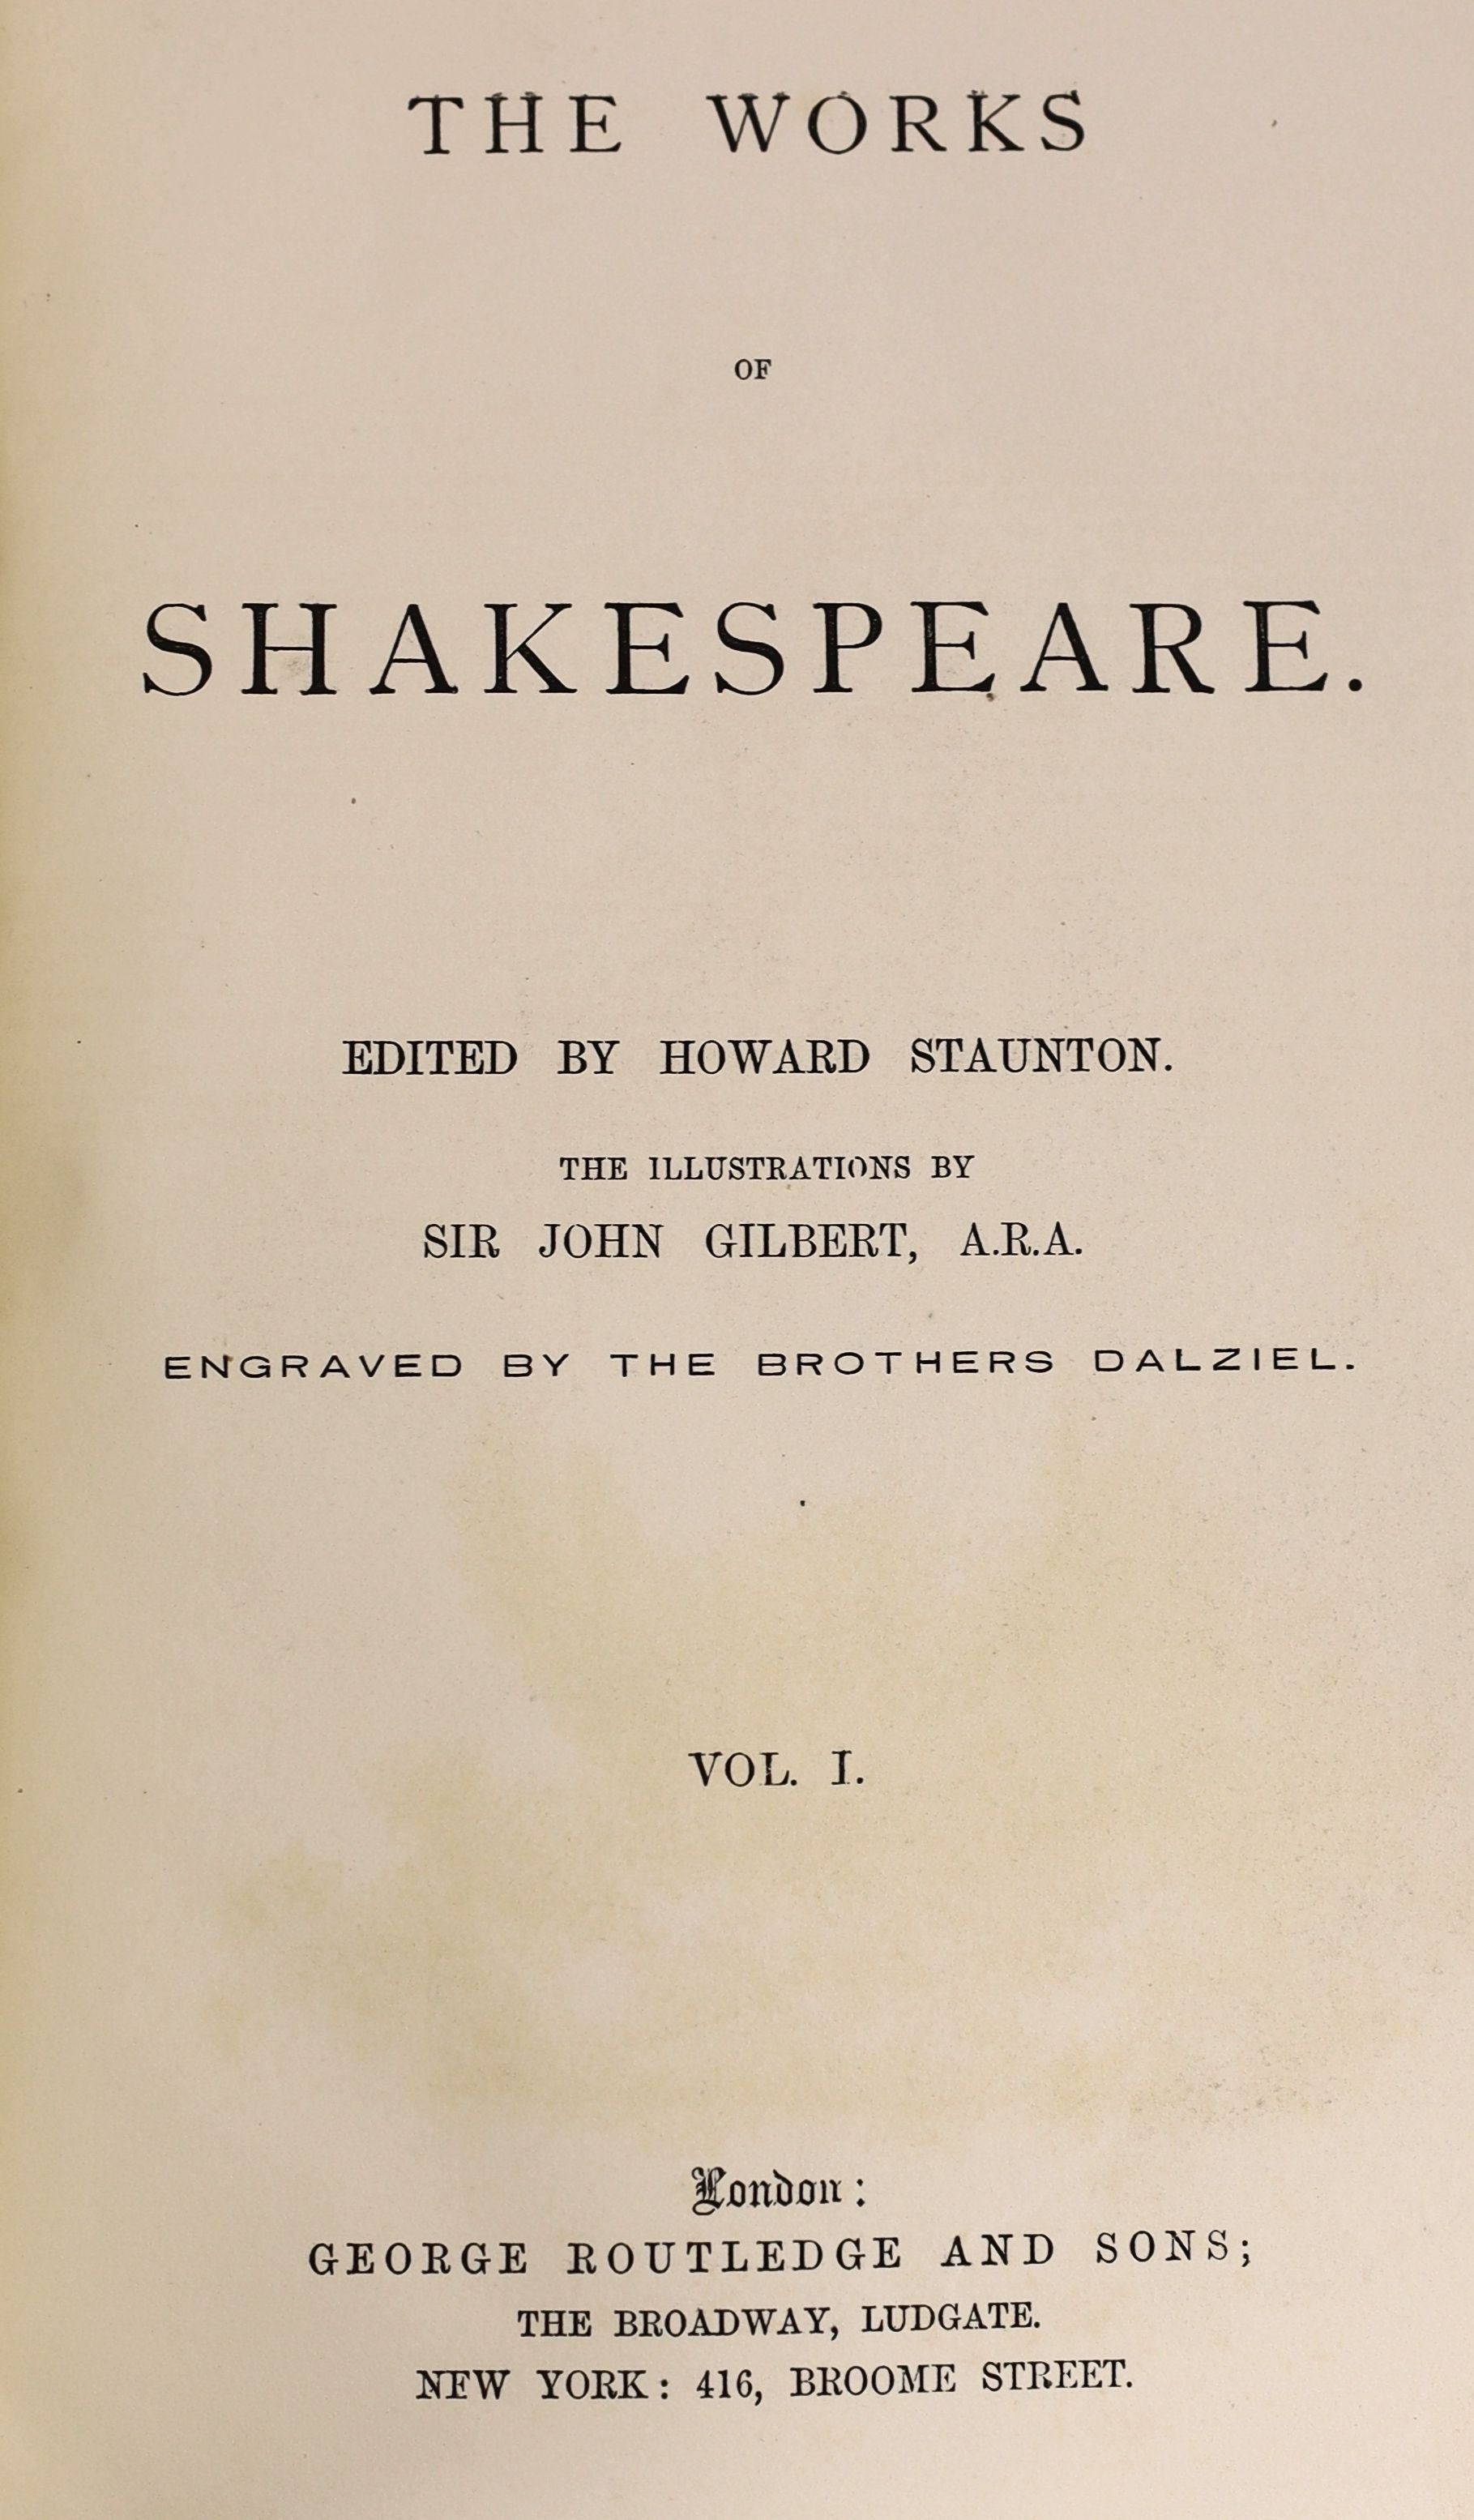 Shakespeare, William - The Works of Shakespeare, edited by Howard Staunton, 3 vols, 4to, red morocco gilt, with illustrations by Sir John Gilbert, A.R.A., engraved by the brothers Dalziel, George Routledge and Sons, Lond